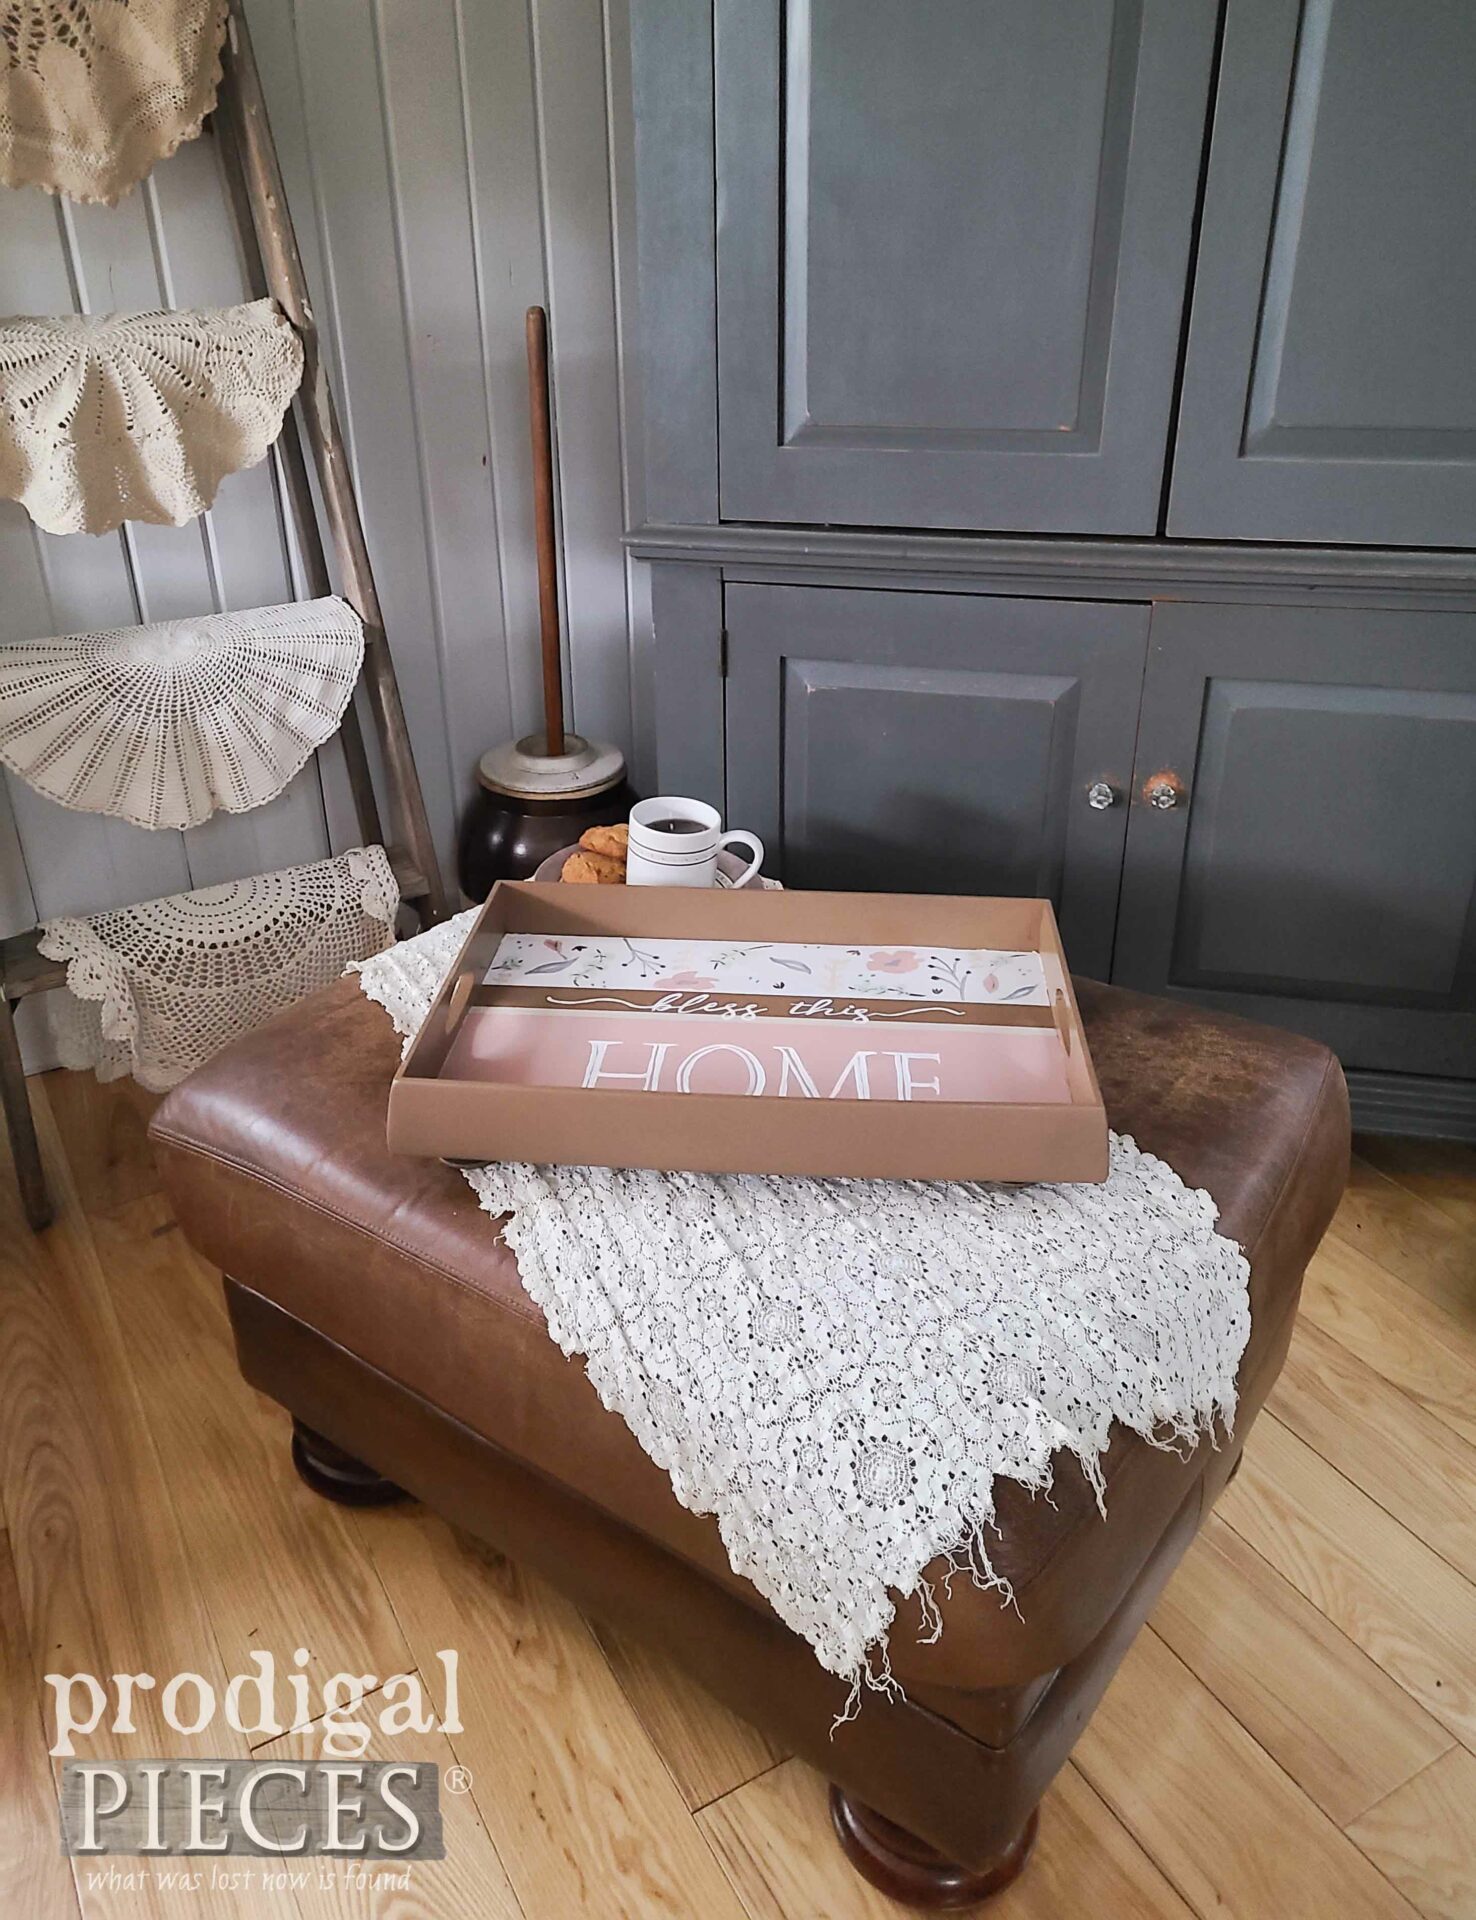 Farmhouse Style Living Room with Thrift Store Tray | prodigalpieces.com #prodigalpieces #farmhouse #diy #crafts